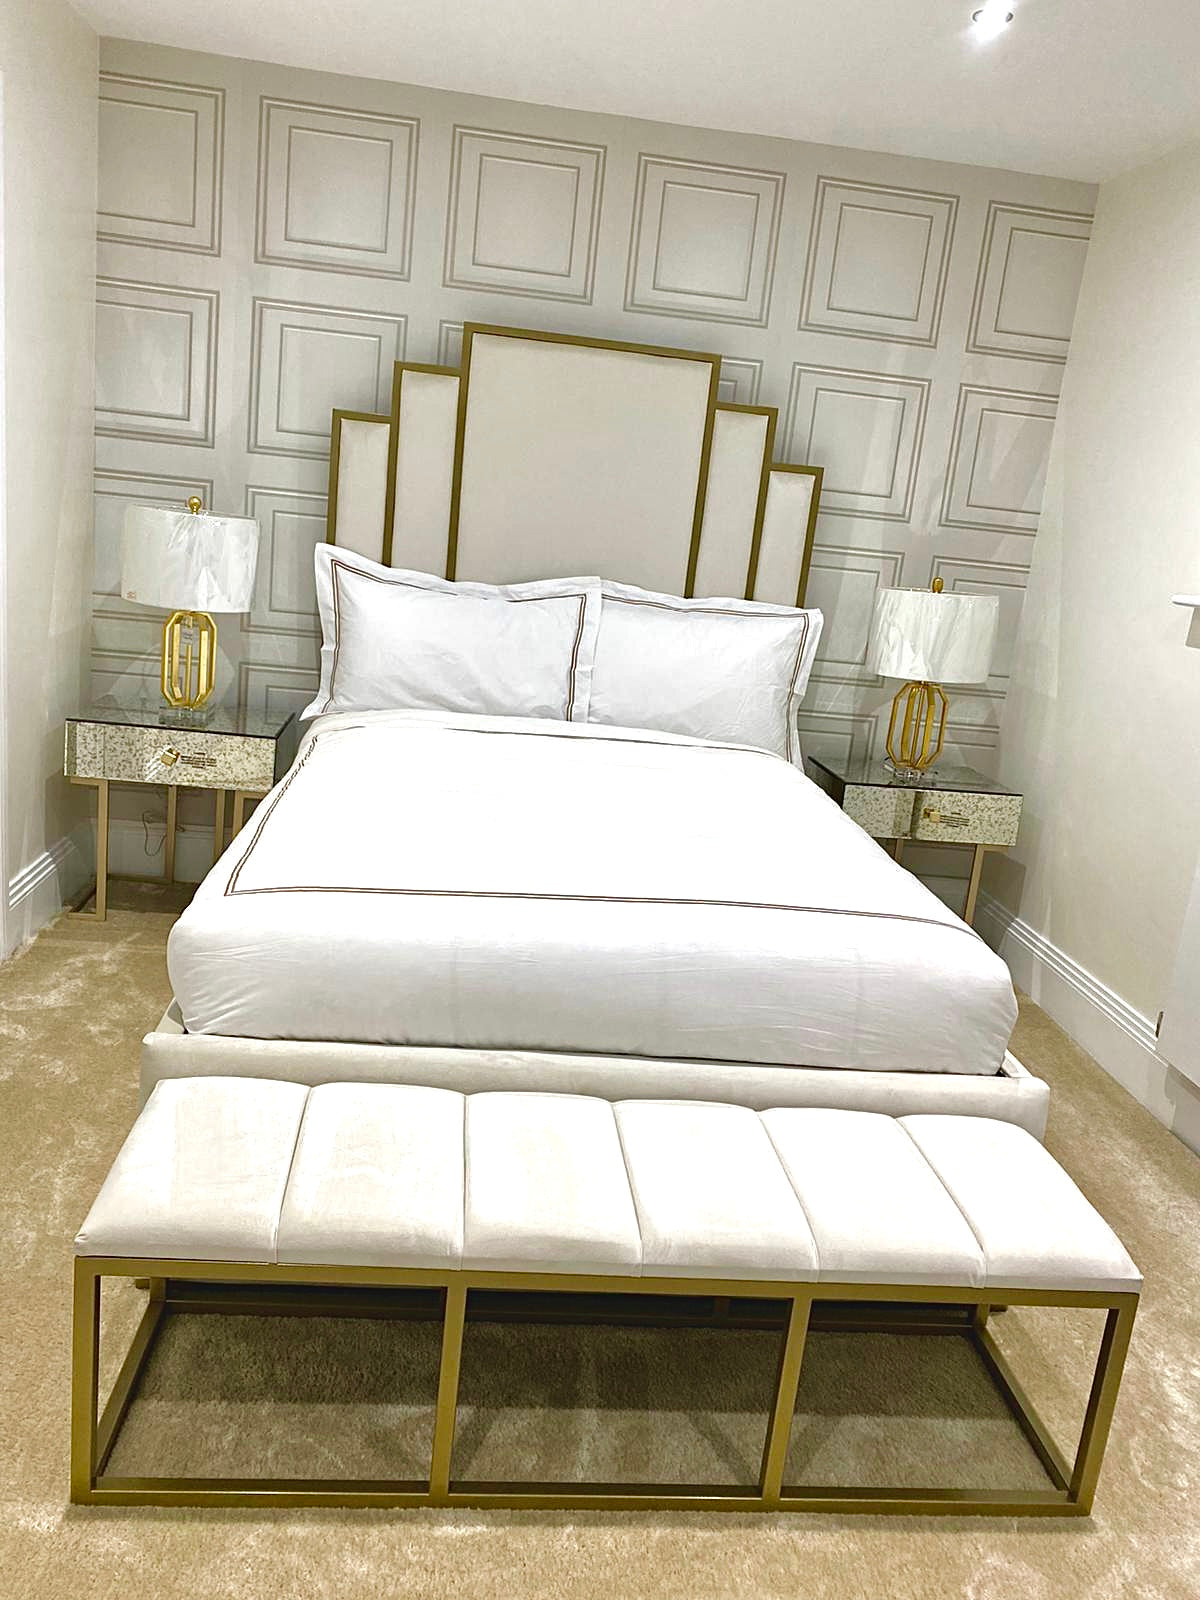 The Bespoke Gatsby Bed -Fully Customisable with Storage Options- Luxe Range